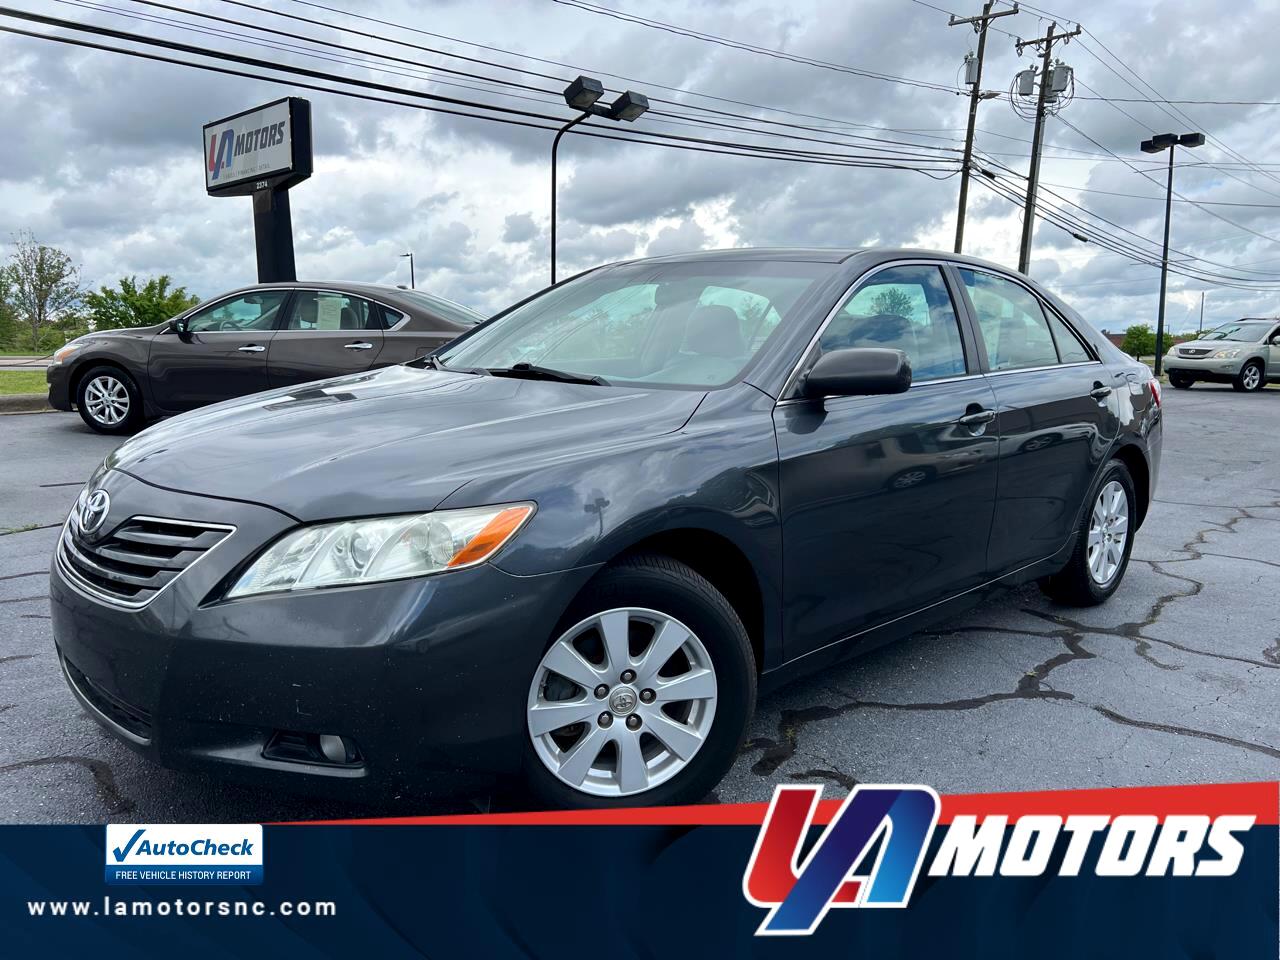 2007 Toyota Camry 4dr Sdn V6 Auto XLE (Natl)